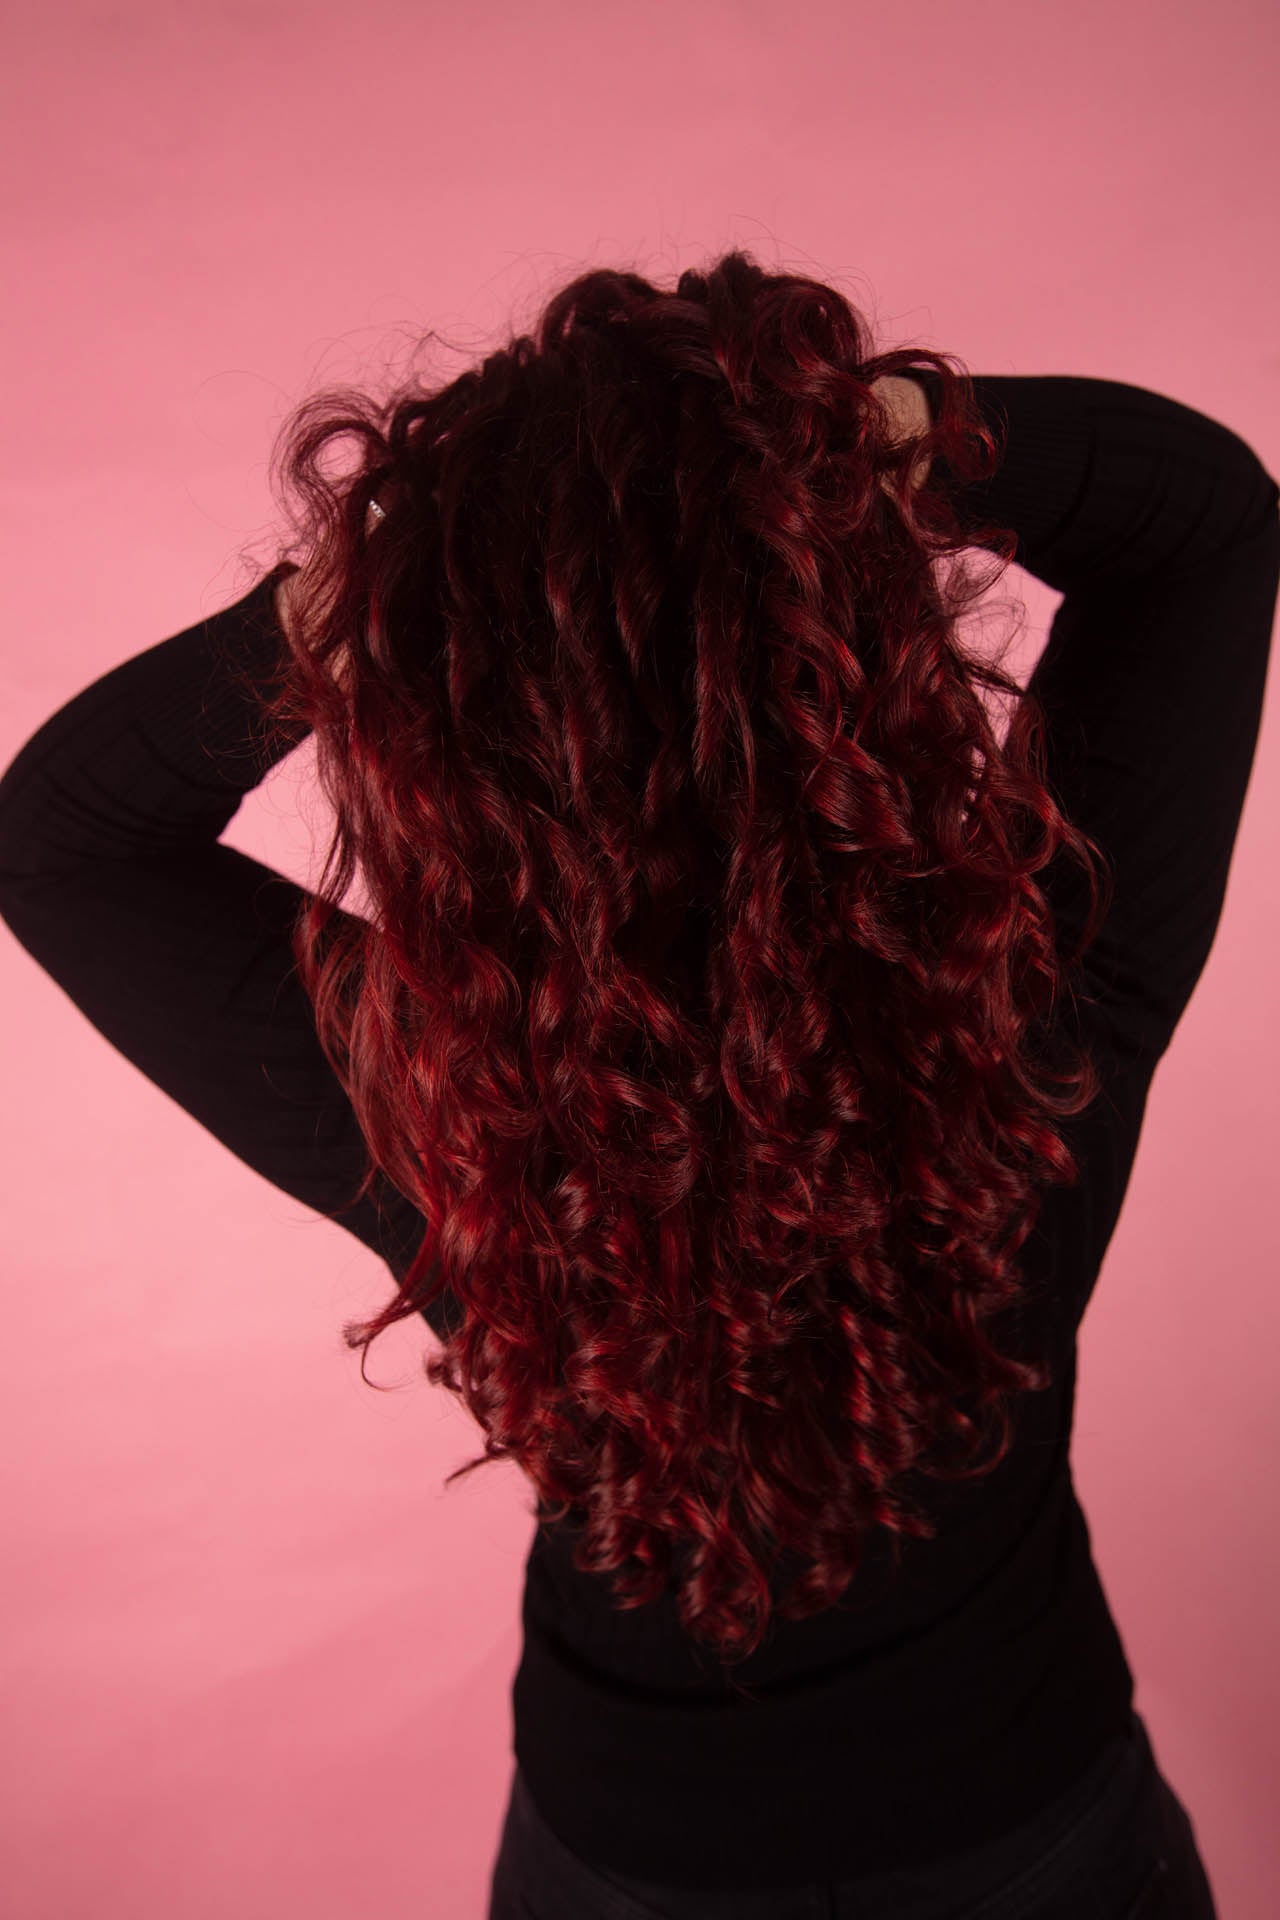 Woman running hands through beautiful deep red curly hair while standing in front of a pink backdrop